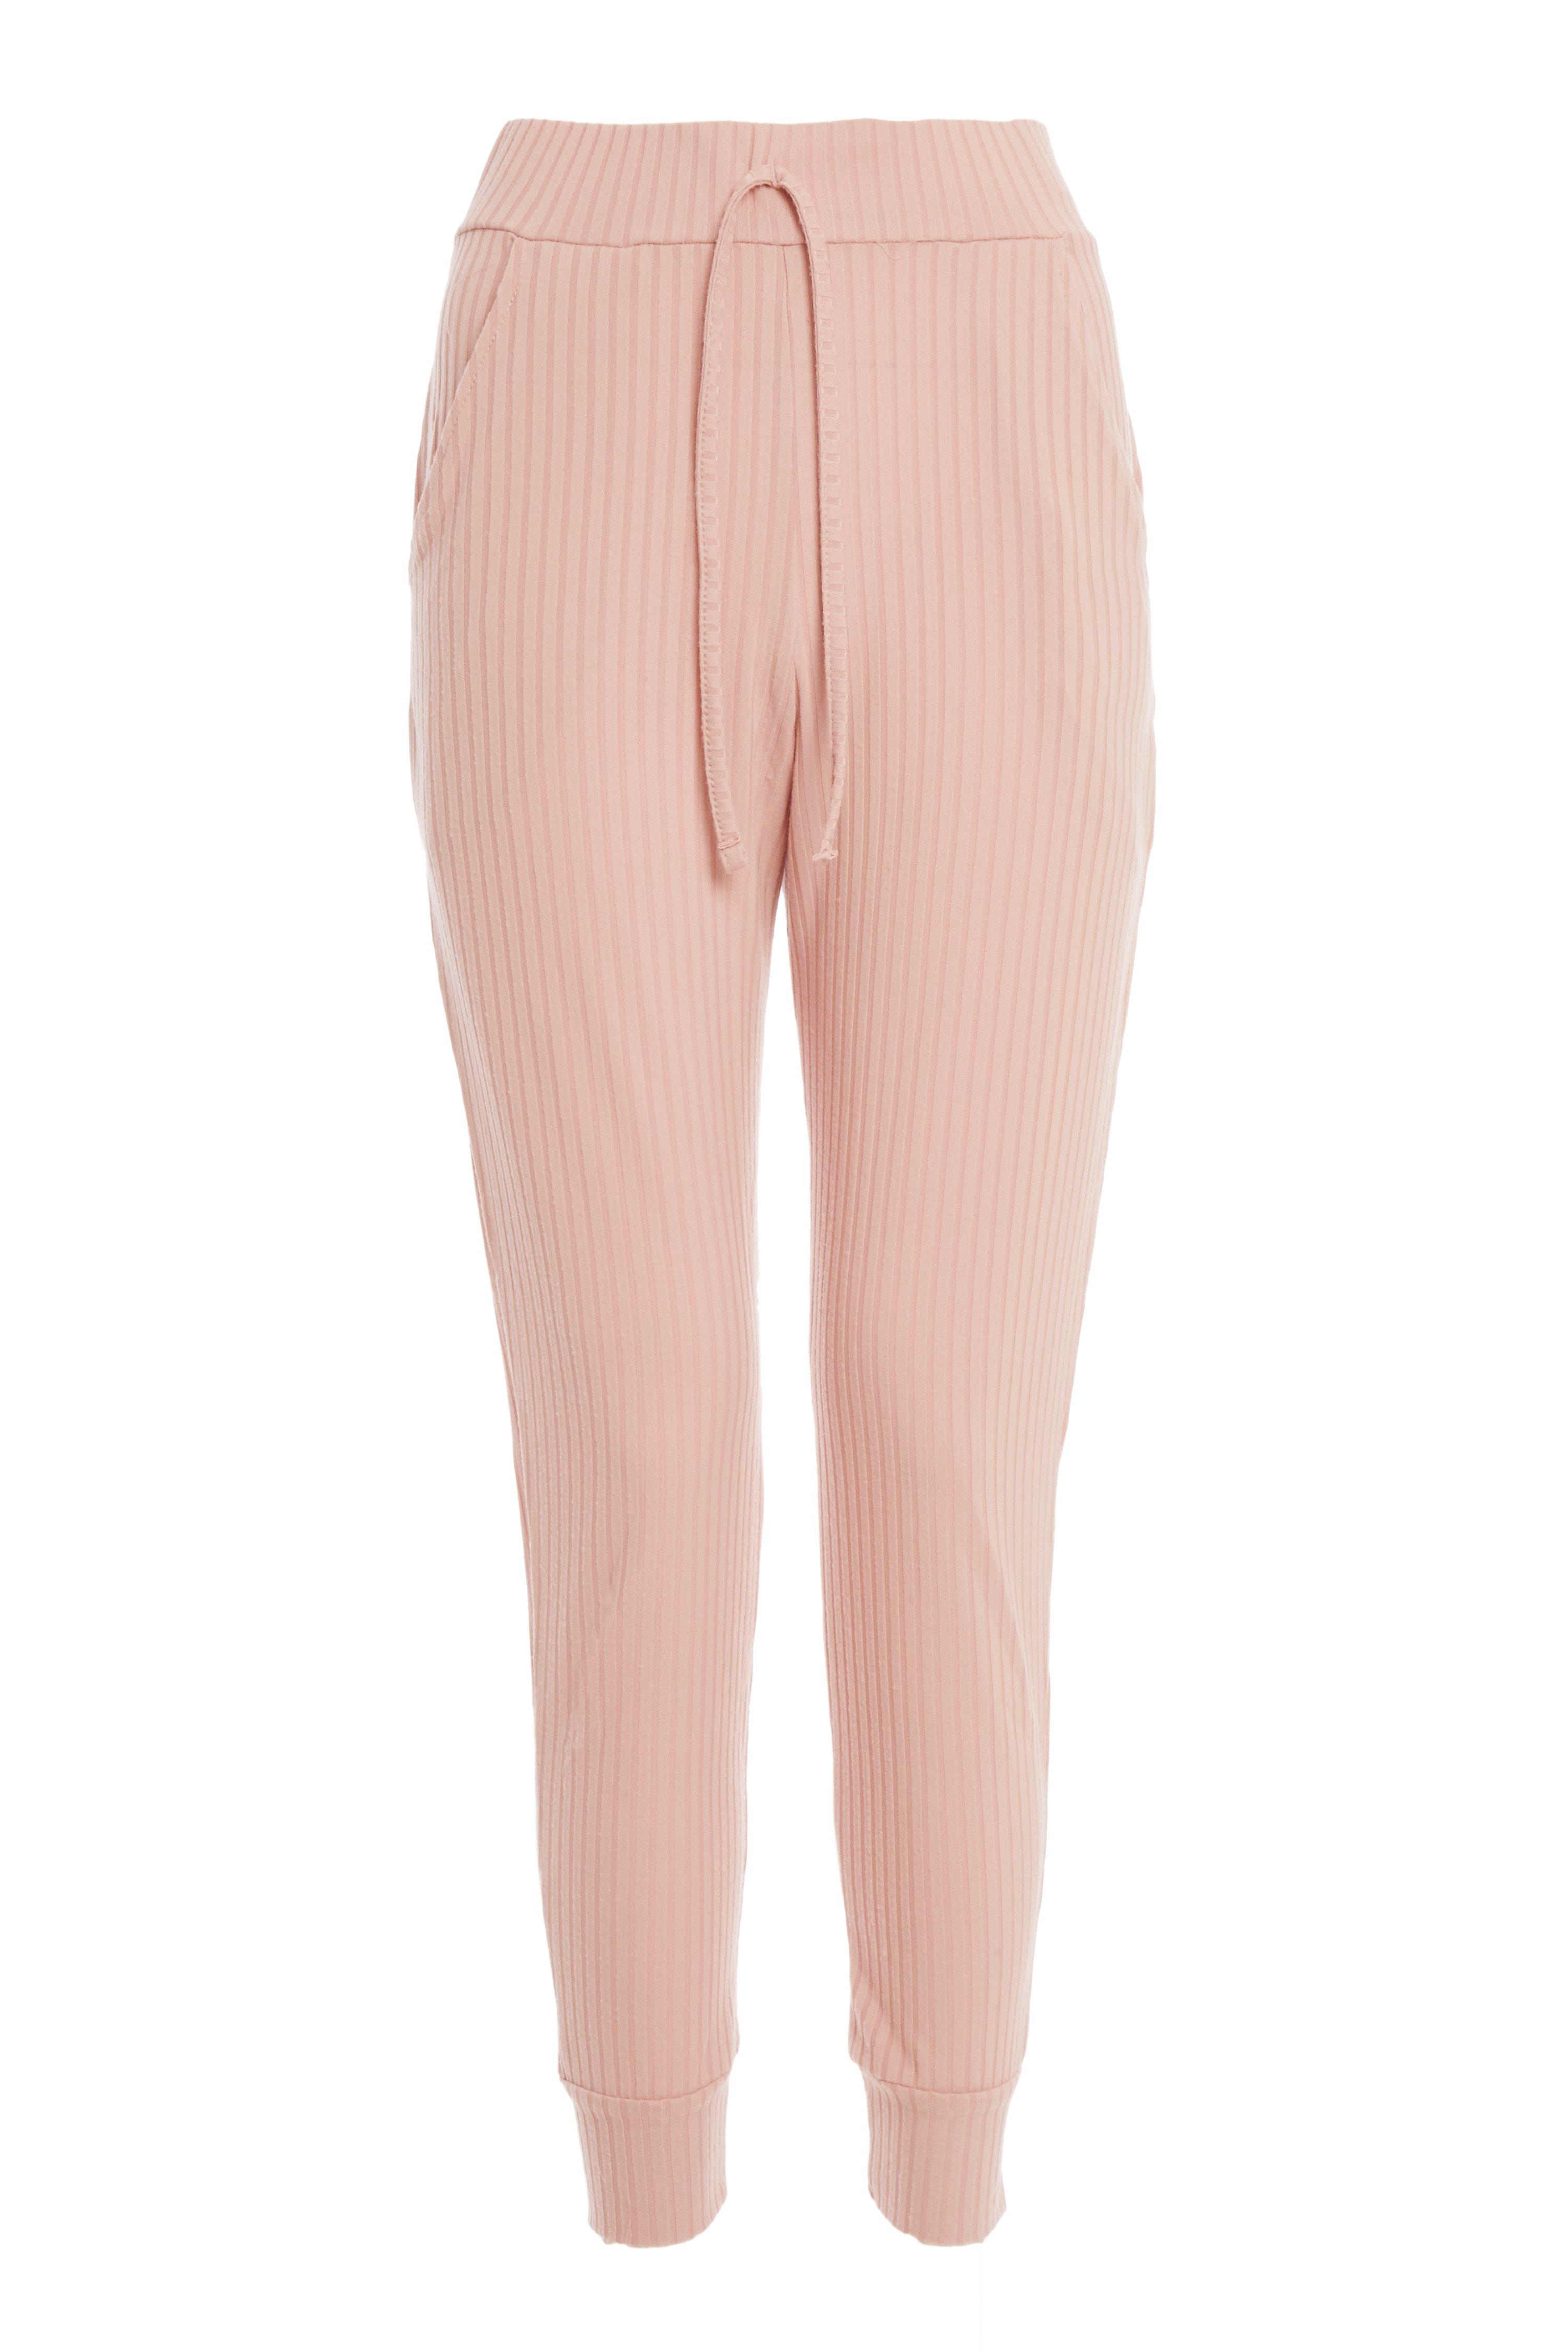 Petite Pink Ribbed Trousers - Quiz Clothing